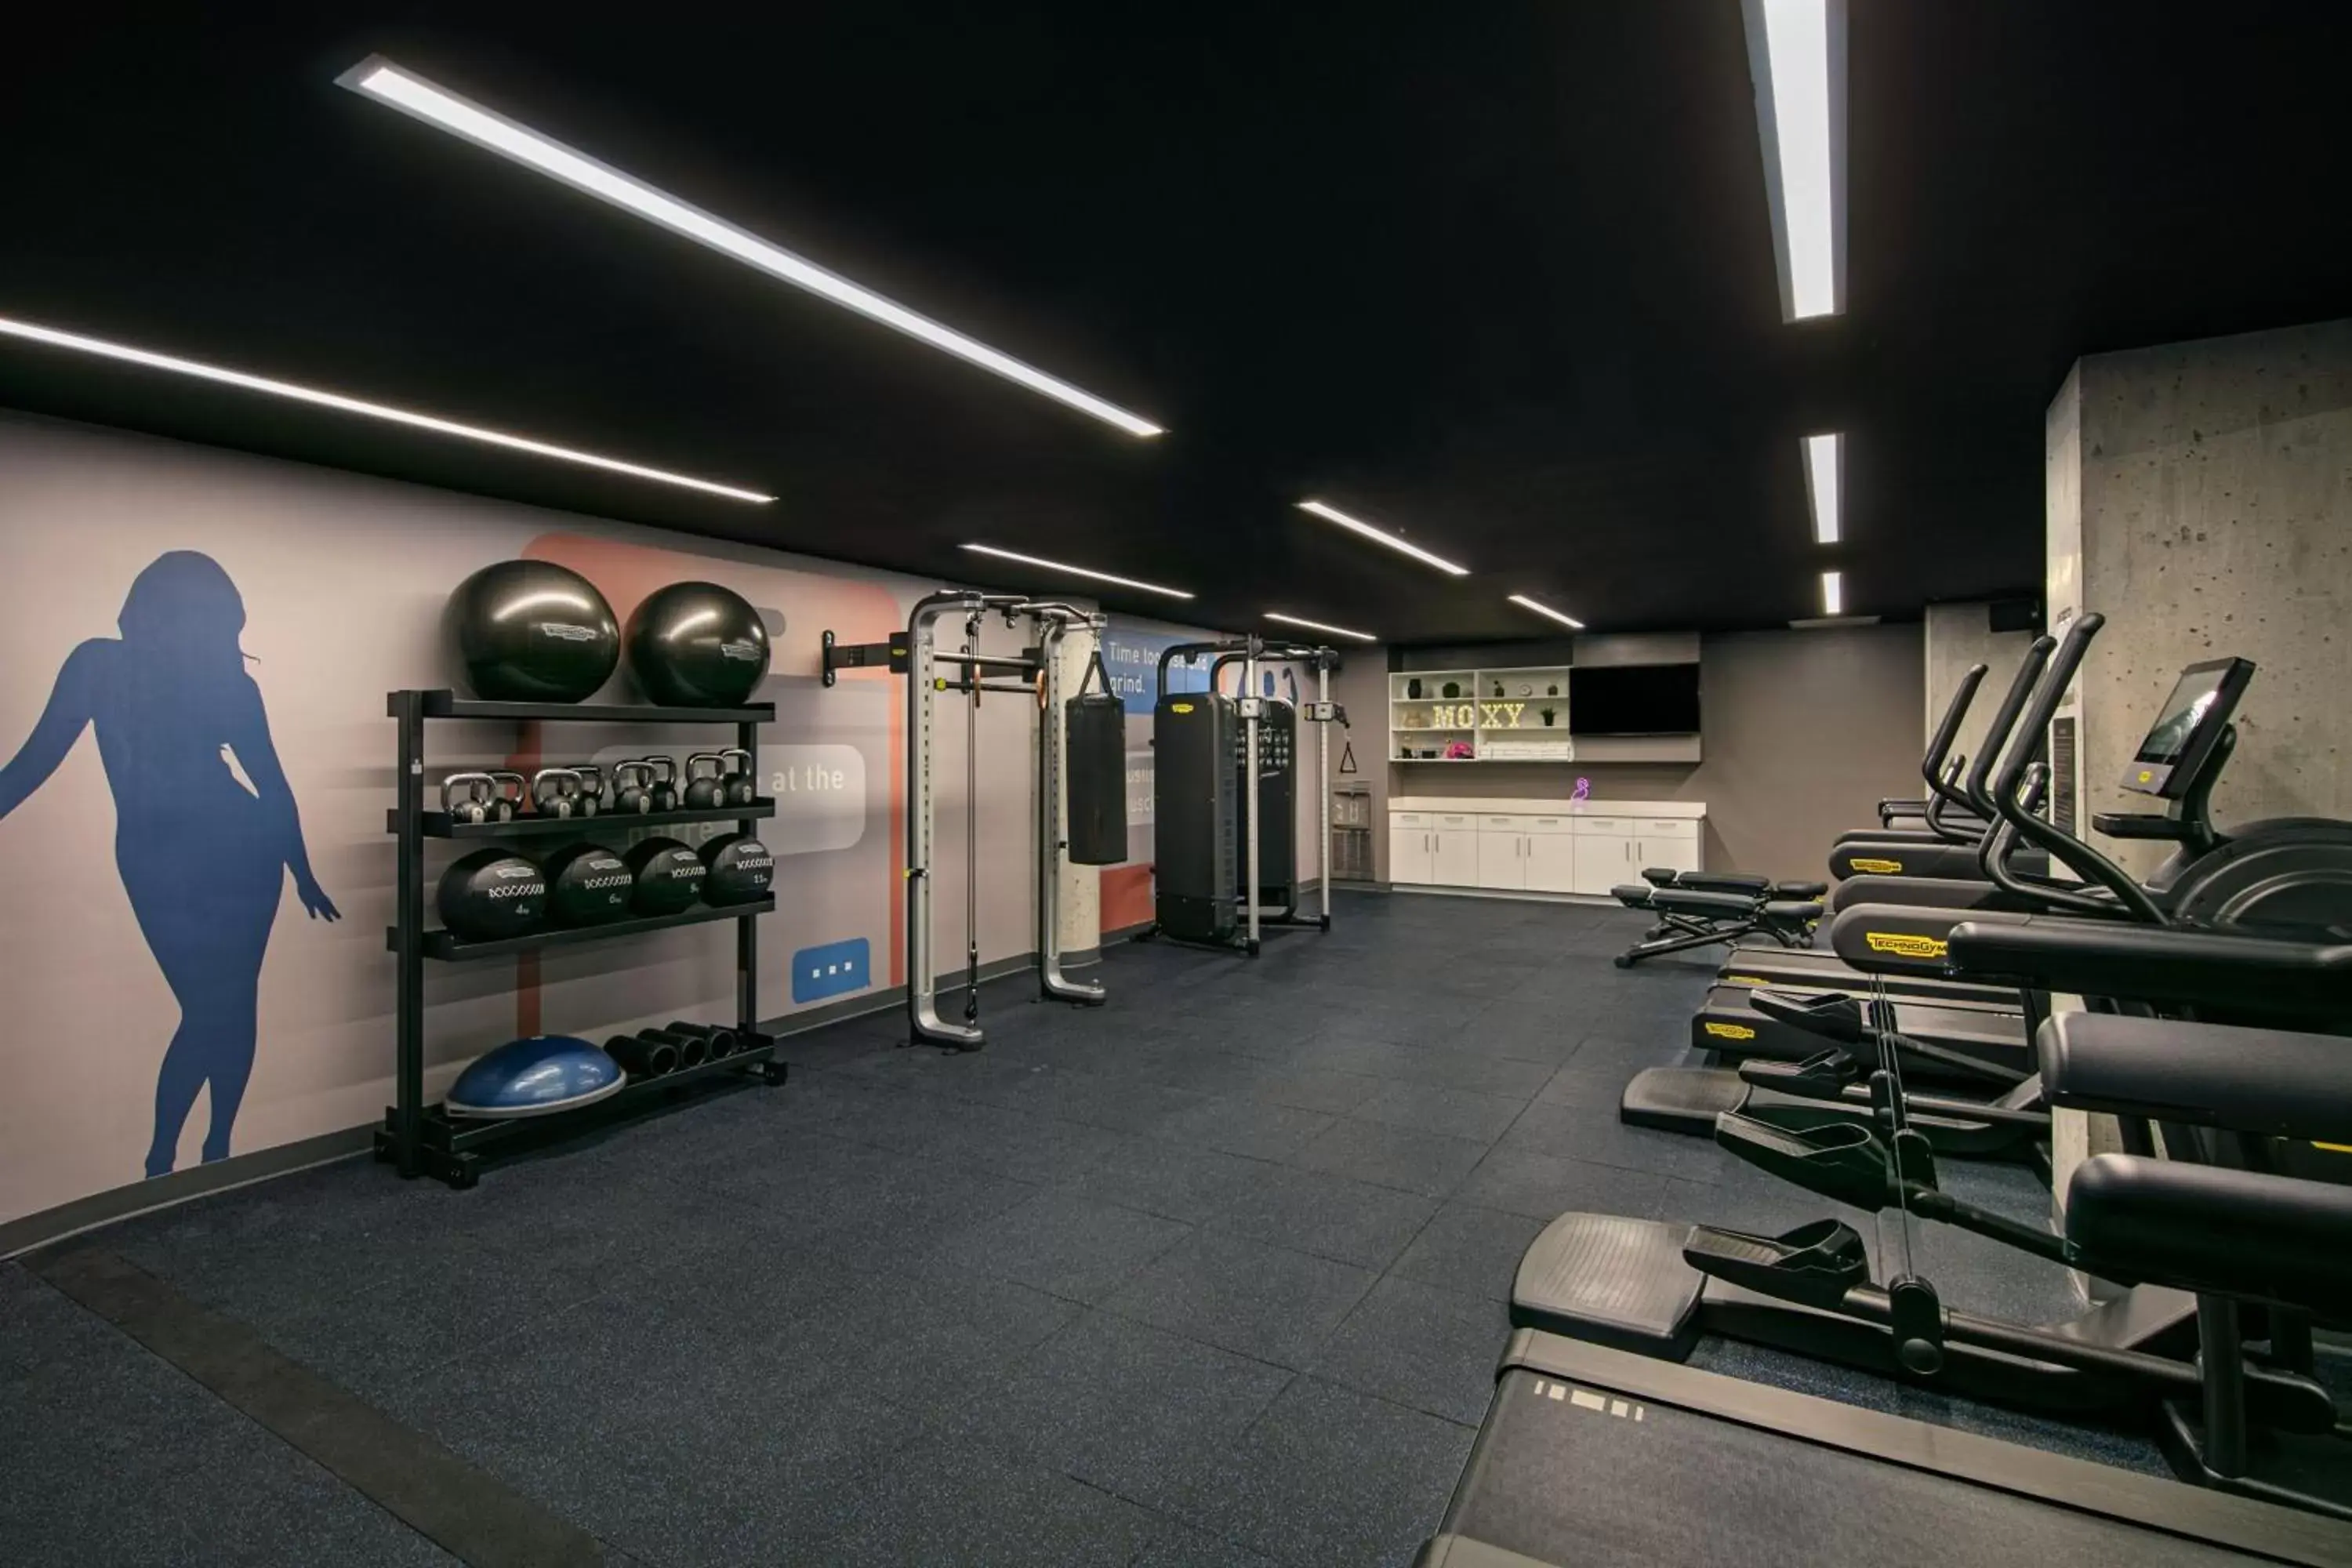 Fitness centre/facilities, Fitness Center/Facilities in Moxy NYC Lower East Side